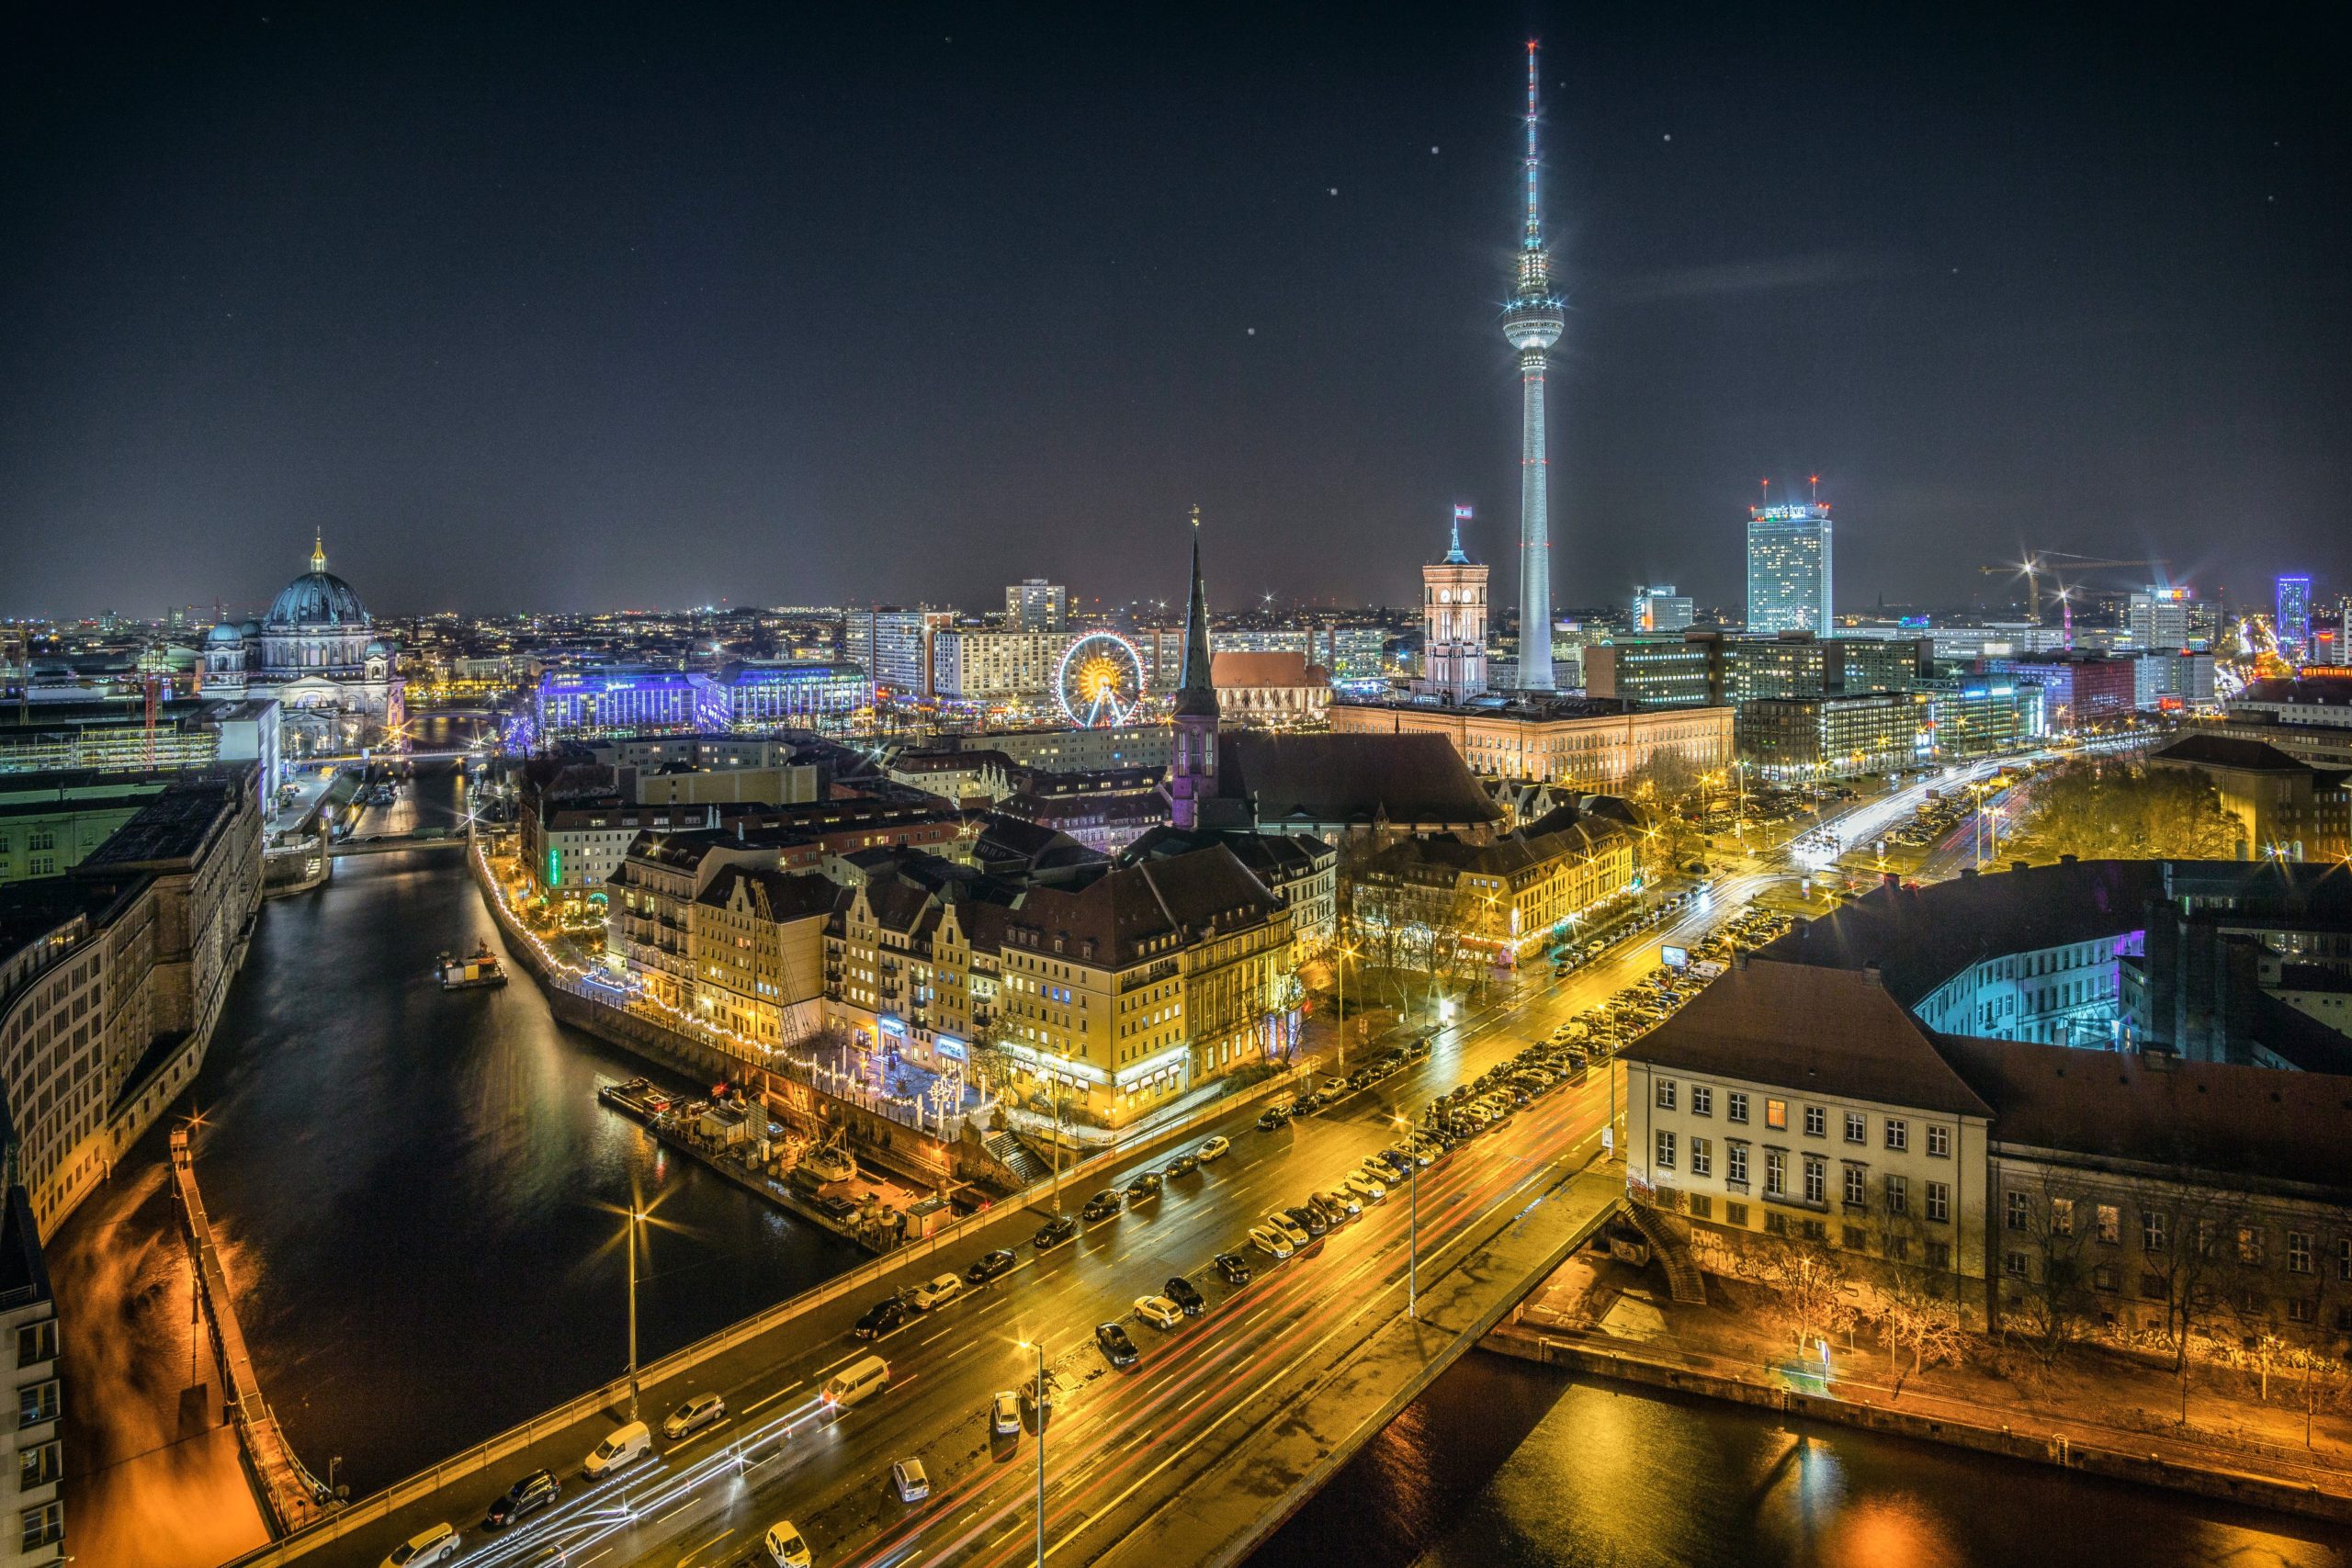 Timelapse photo depicting the skyline of Berlin including the River Spree, TV tower and Nikolaiviertel by Stefan Widua.